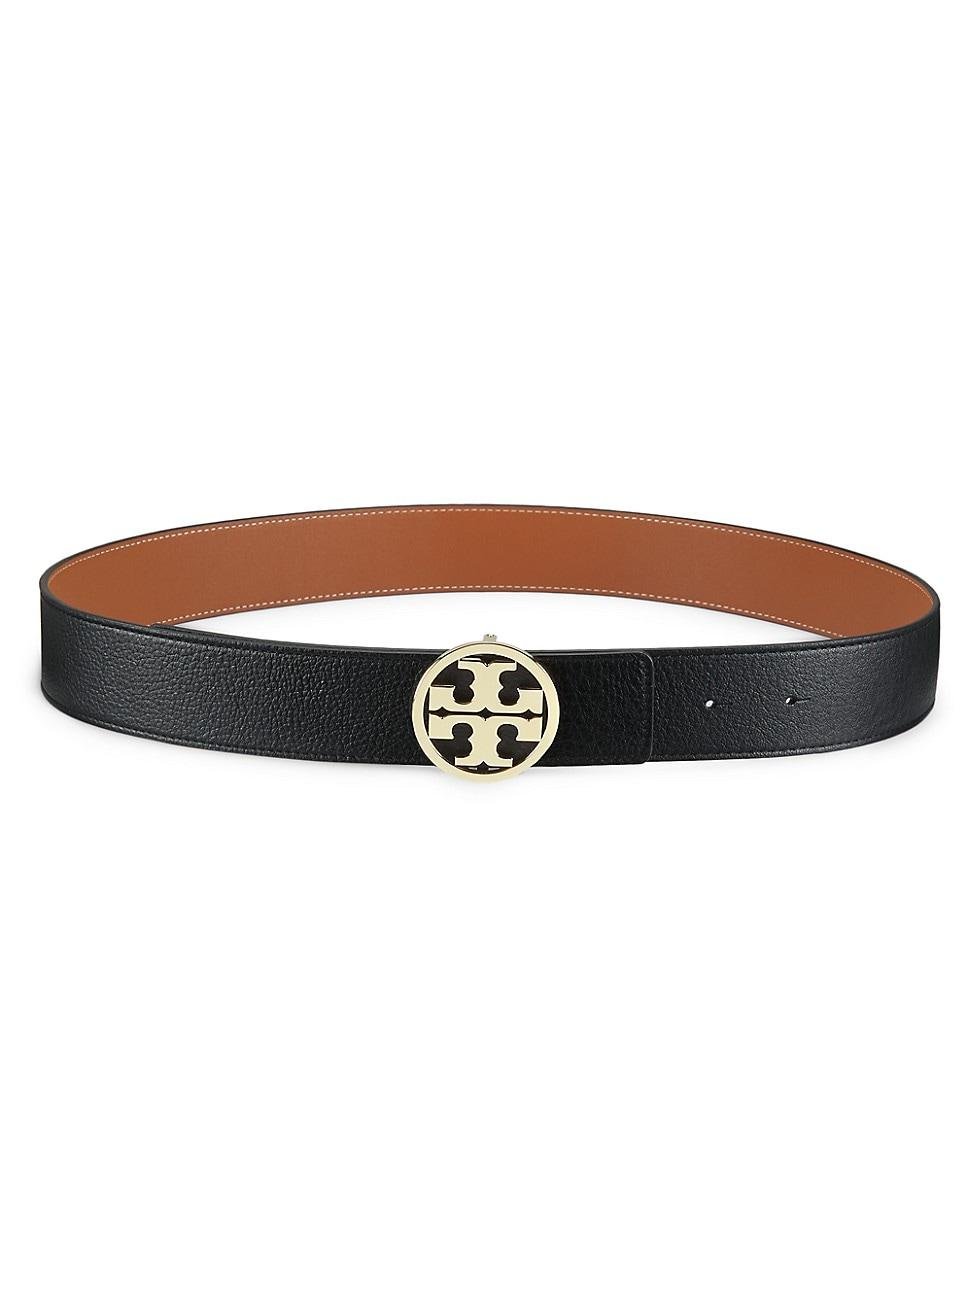 Tory Burch Reversible Miller Leather Belt in Brown | Lyst